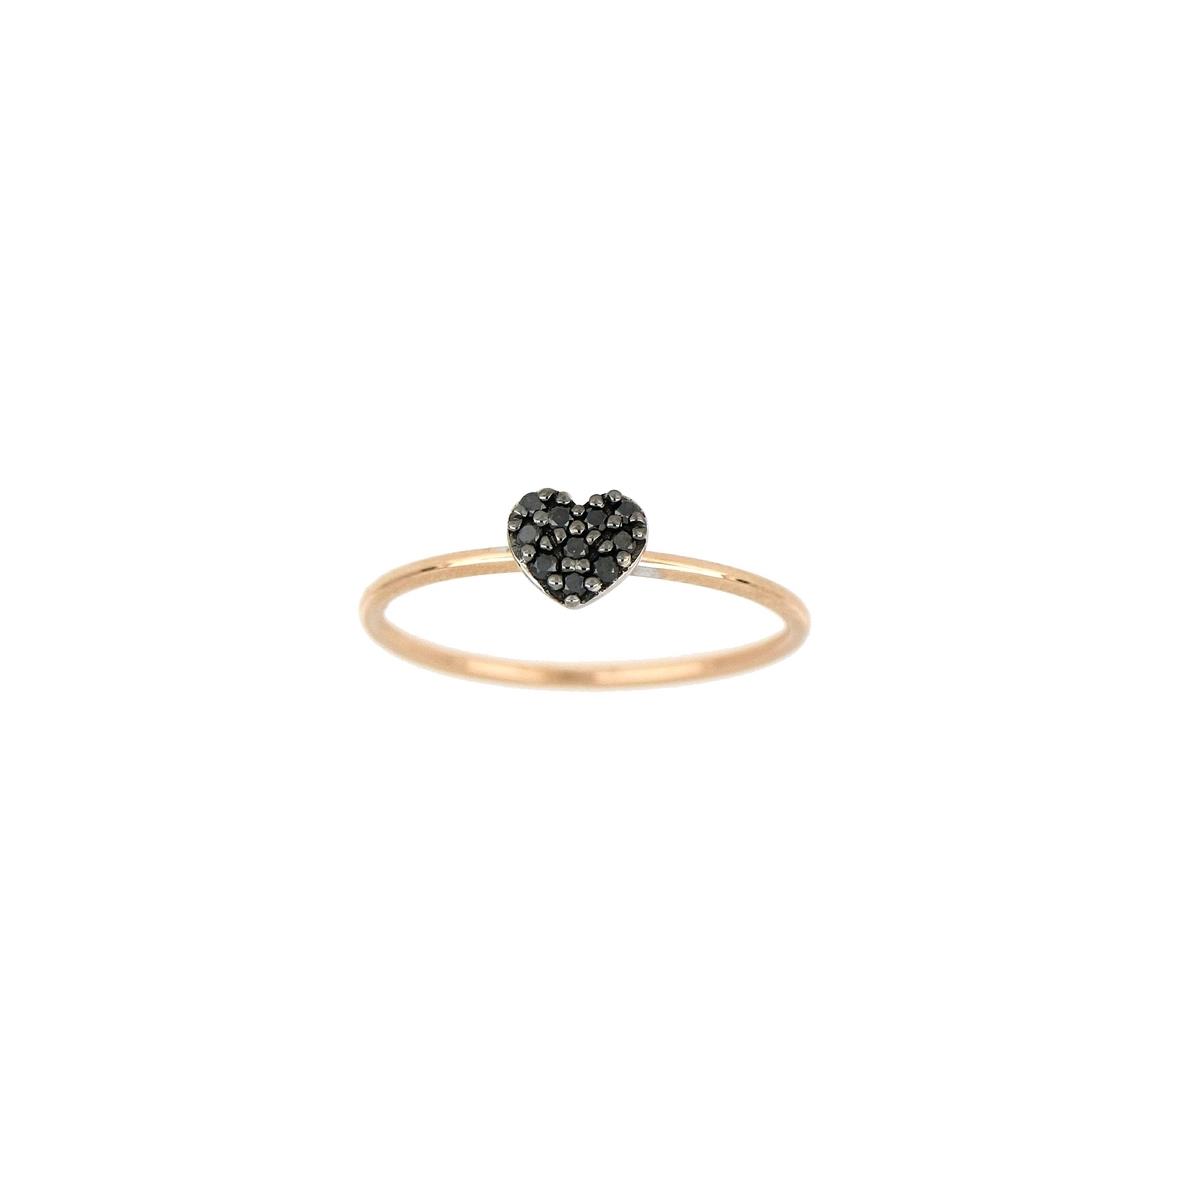 Ring in rose gold and white gold, black rhodium and with black diamonds - GOLD ART